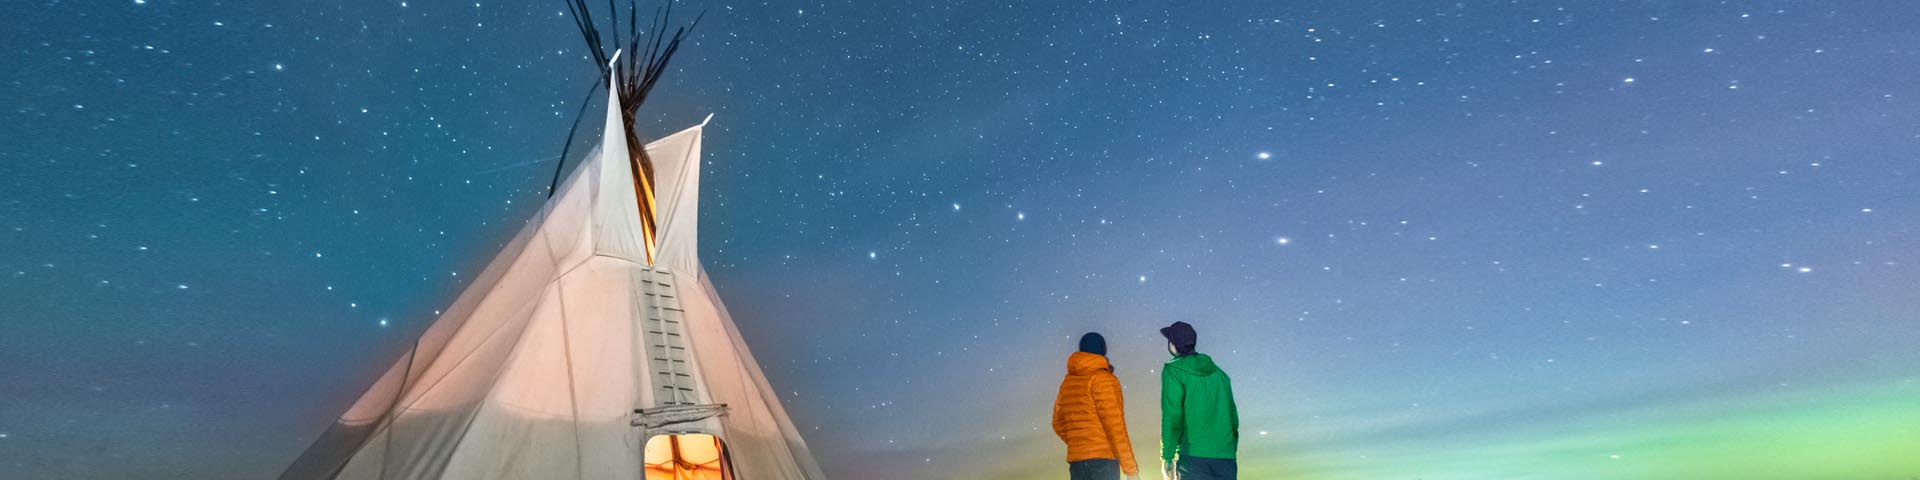 Two visitors gazing at the Big Dipper stars outside a tipi on a starry night at Rocky Mountain House National Historic Site.